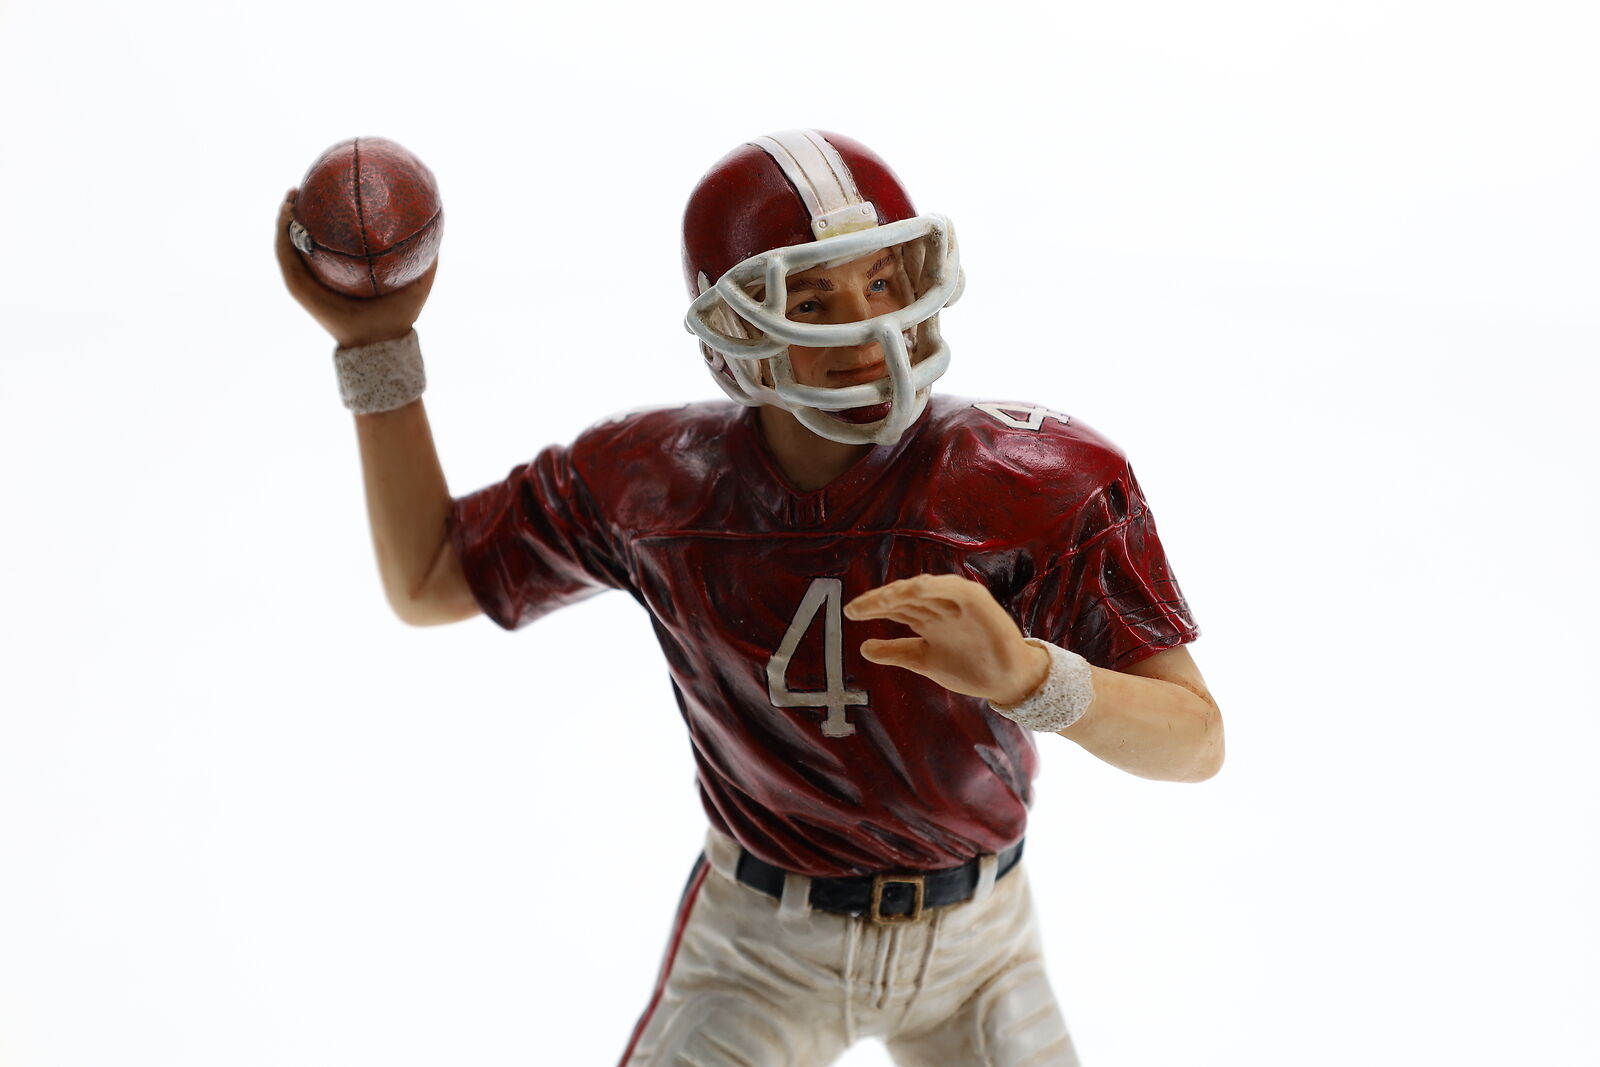 Vintage Football Sports Action Figurine Hand-painted Solid Resin Large 8.75”